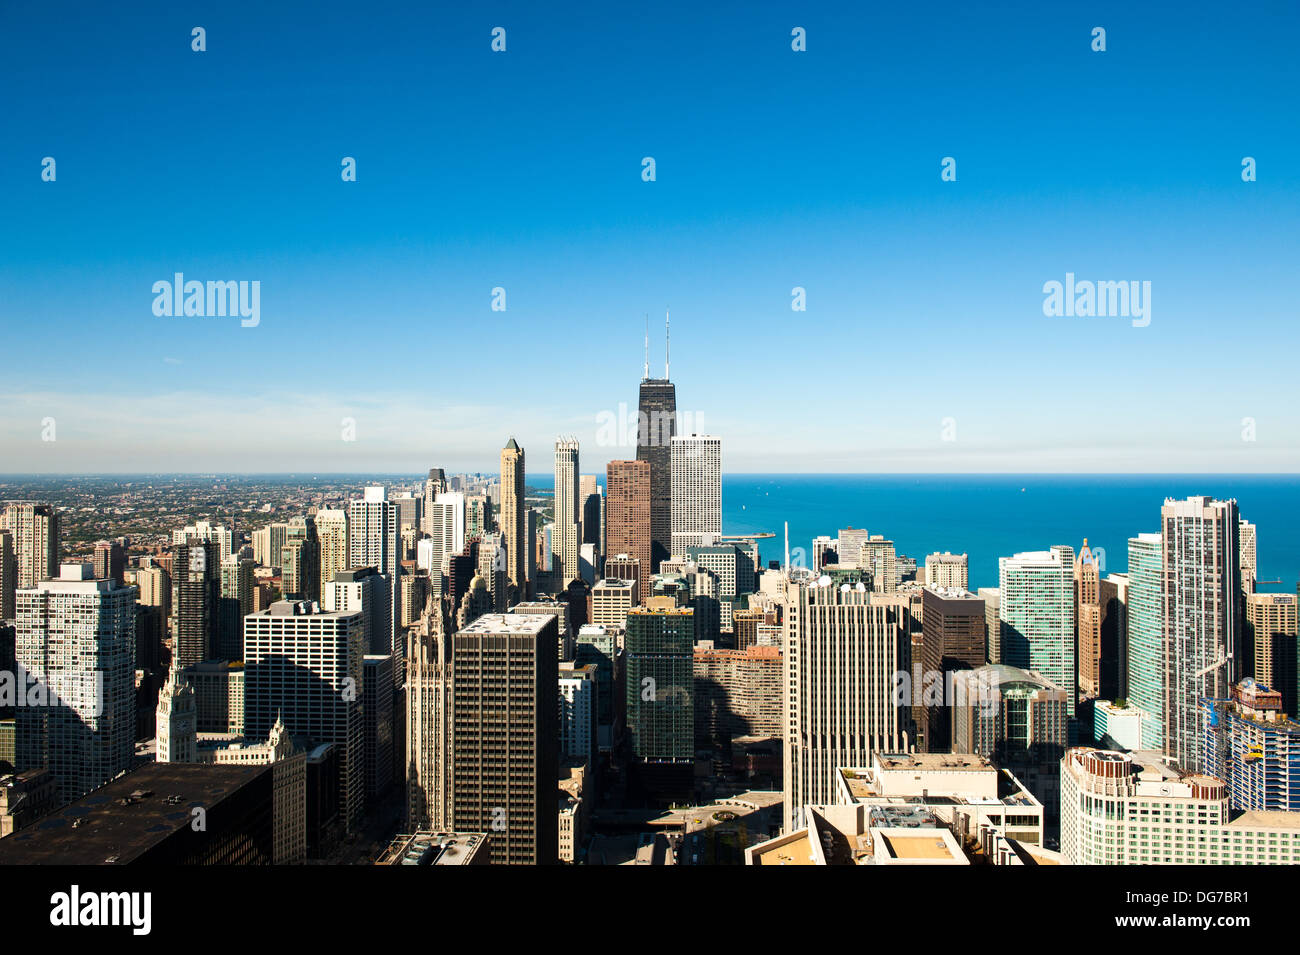 CHICAGO, IL - OCTOBER 9: A northerly view of the Chicago skyline, including the John Hancock Center, pictured on October 9, 2013 Stock Photo